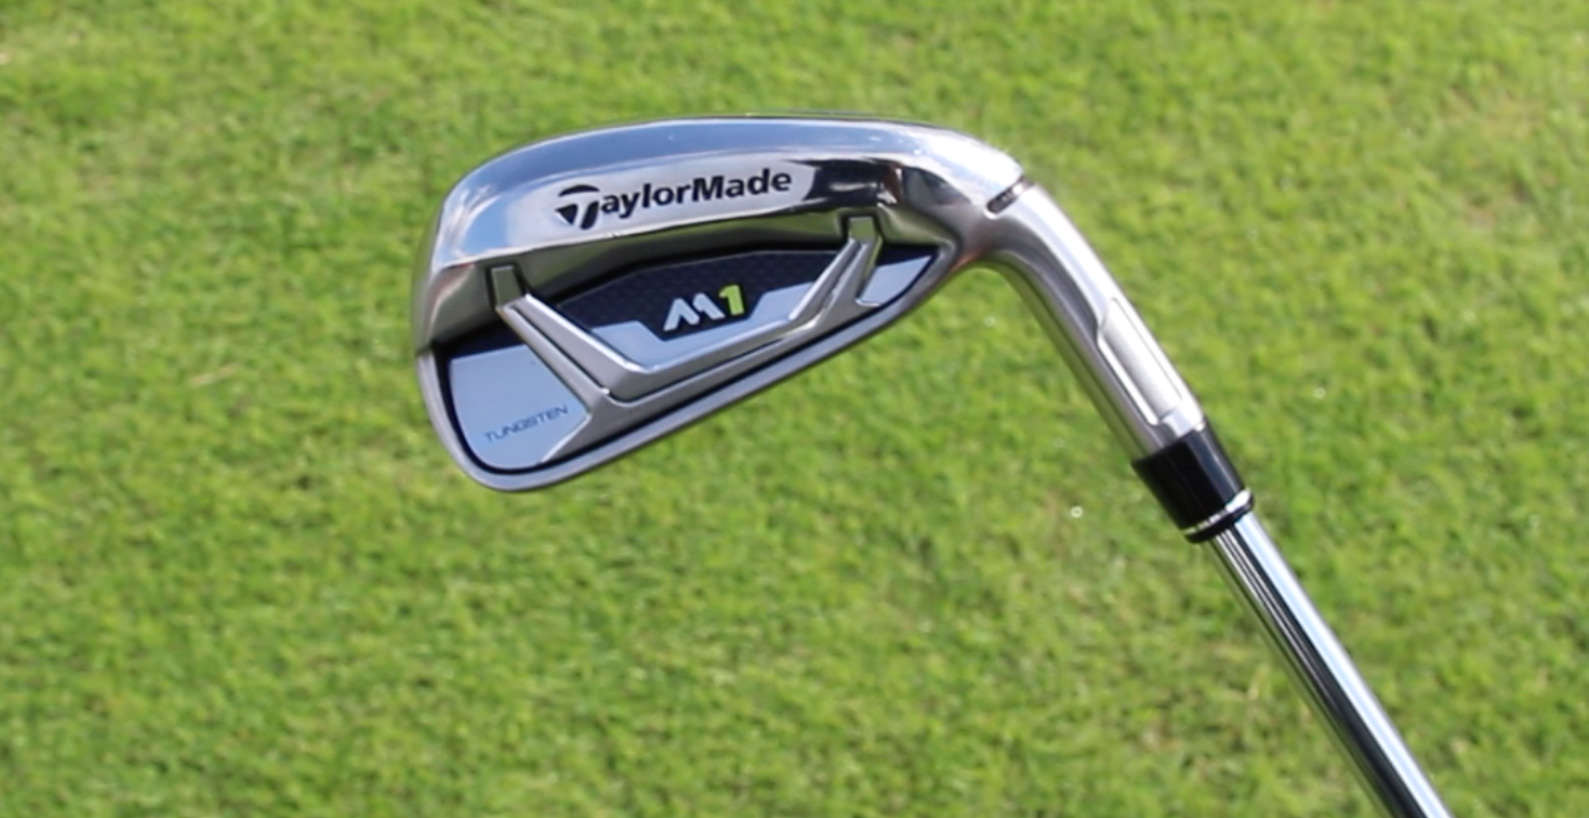 TaylorMade 2017 M1 irons review